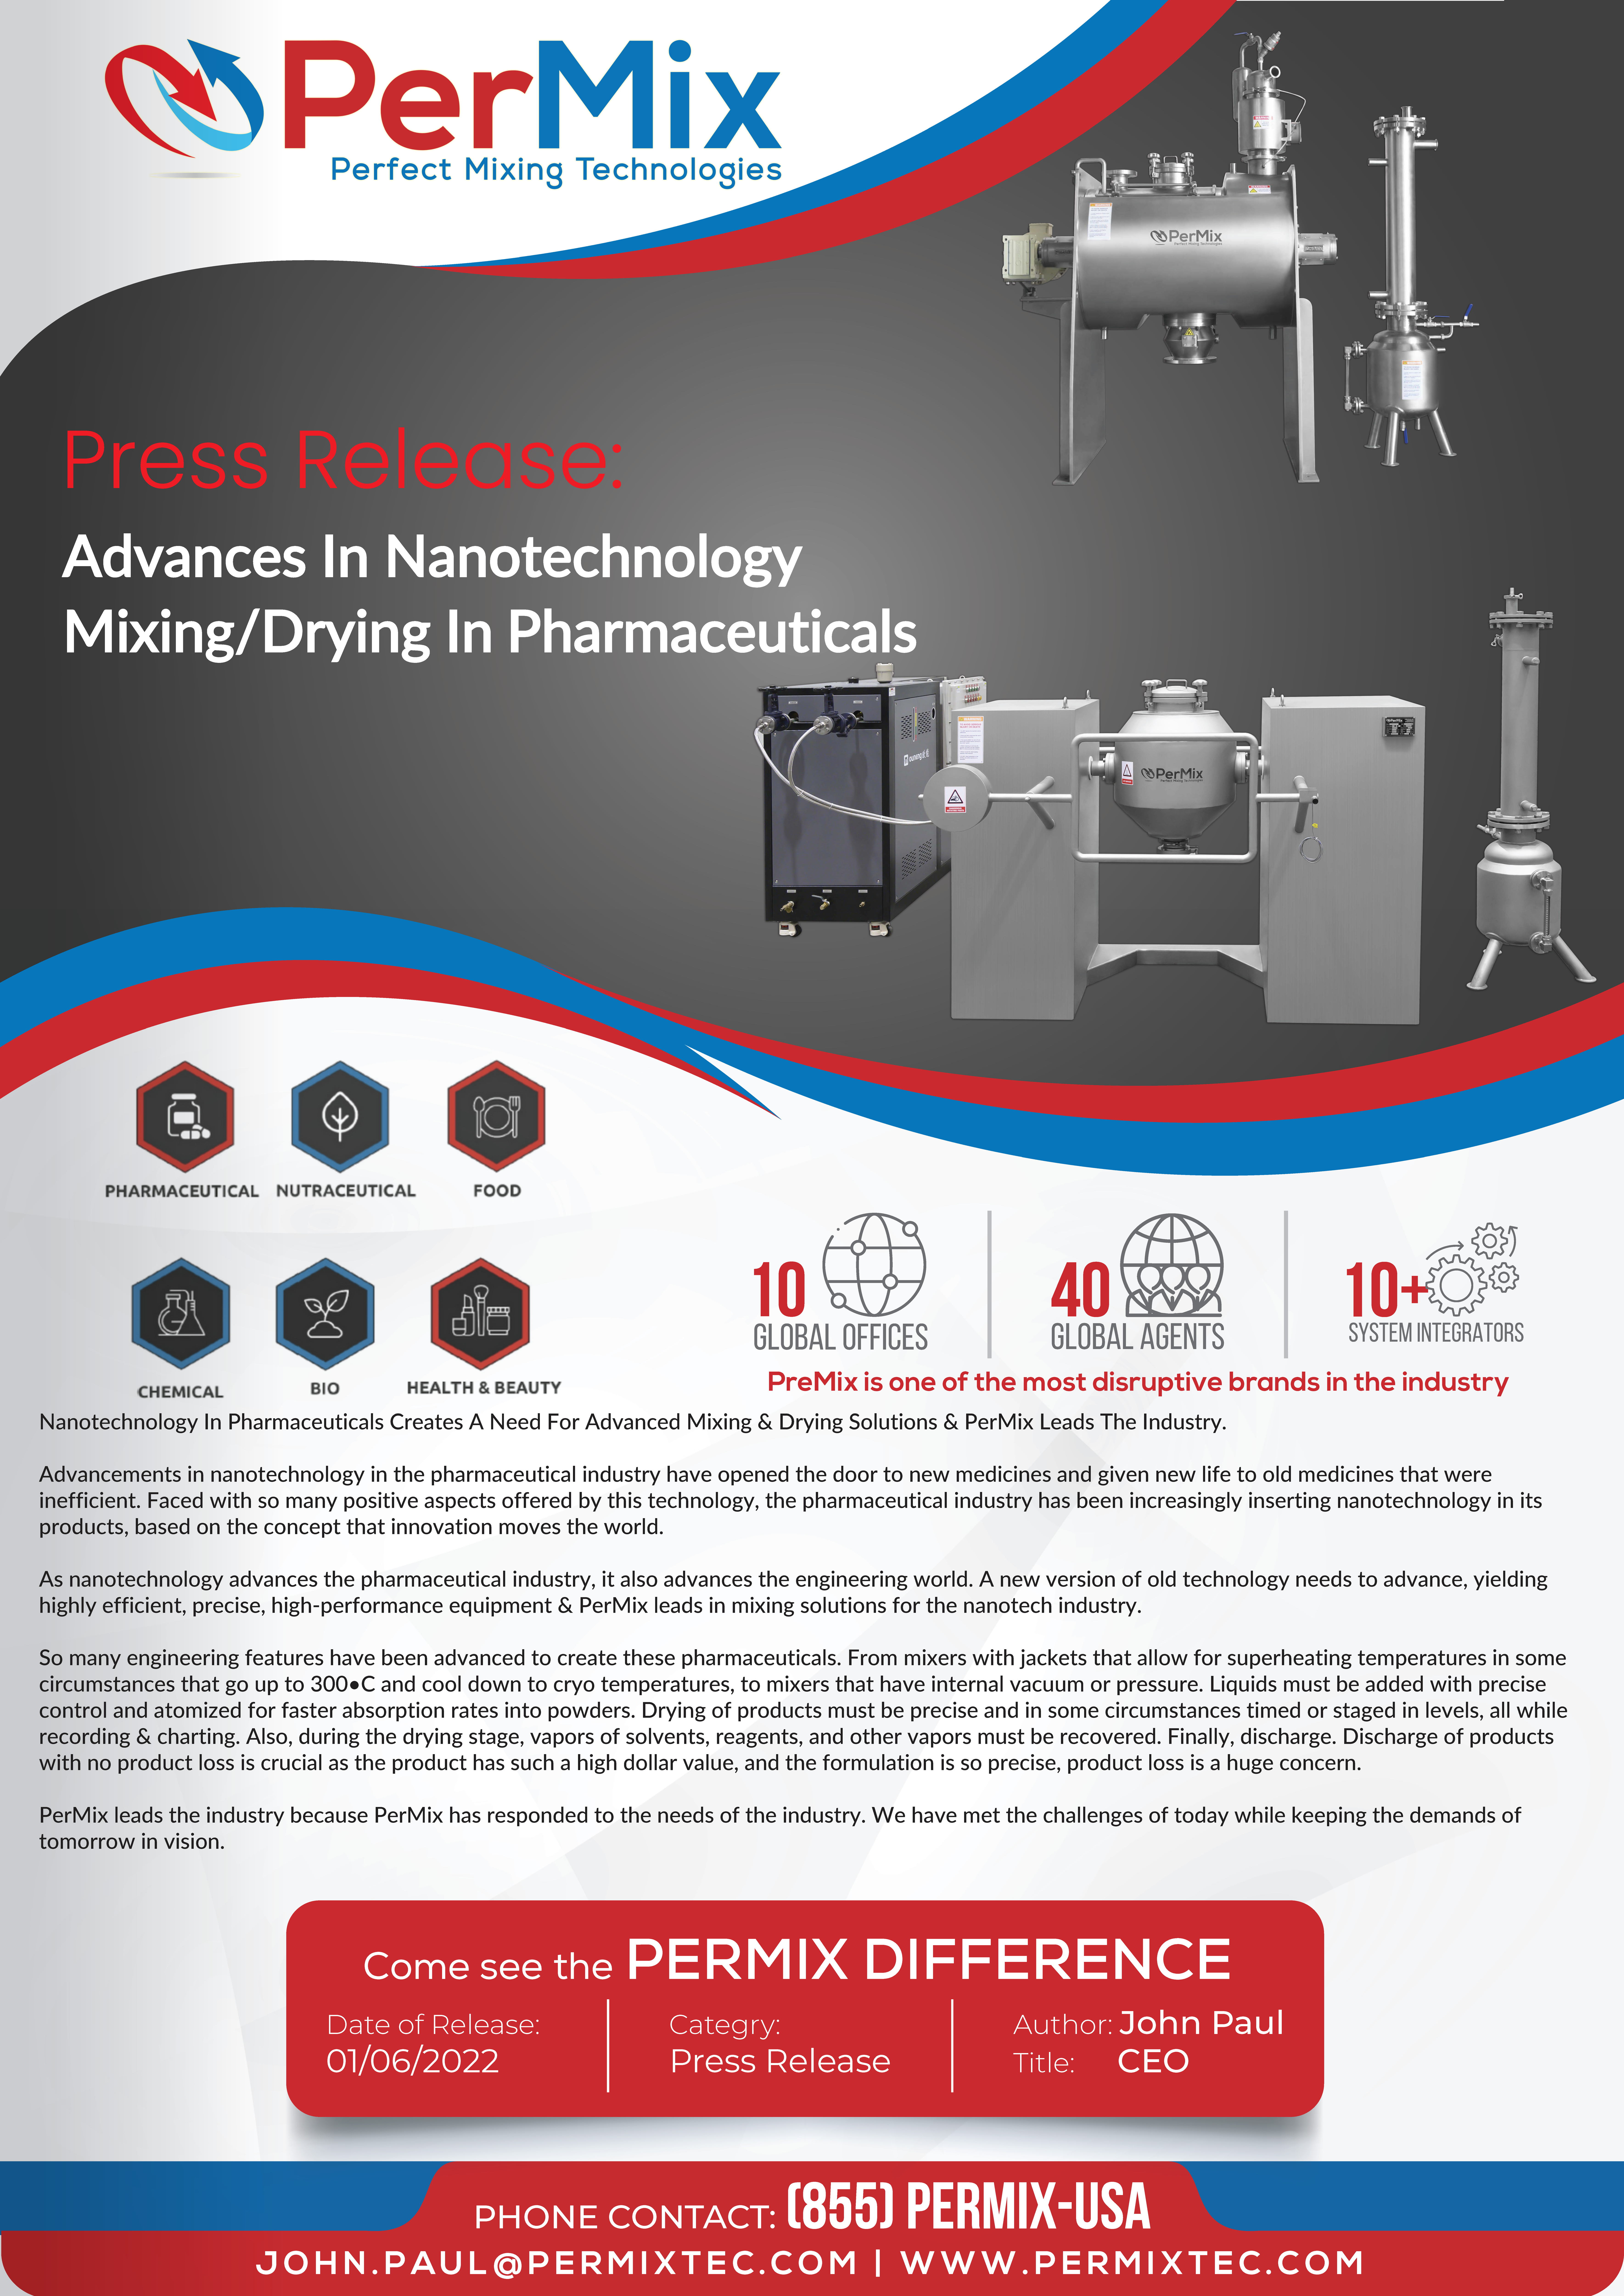 Nanotechnology In Pharmaceuticals Creates A Need For Advanced Mixing & Drying Solutions & PerMix Leads The Industry